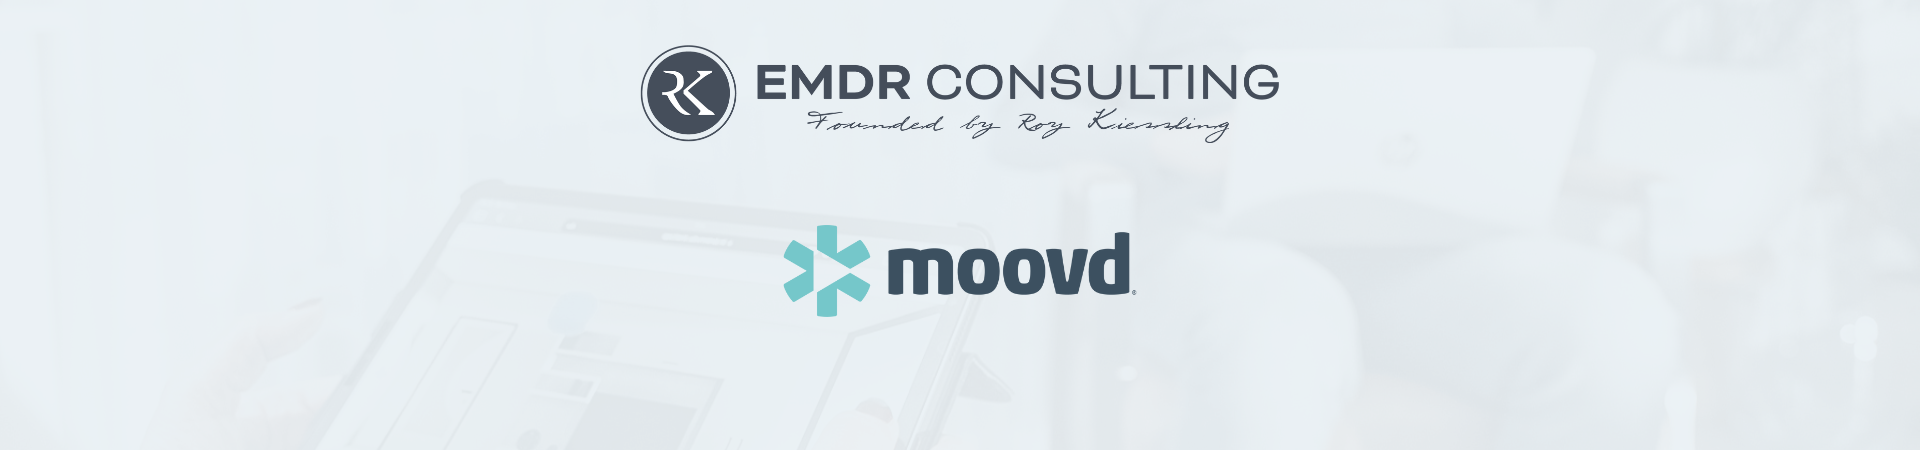 Action-EMDR-Consulting